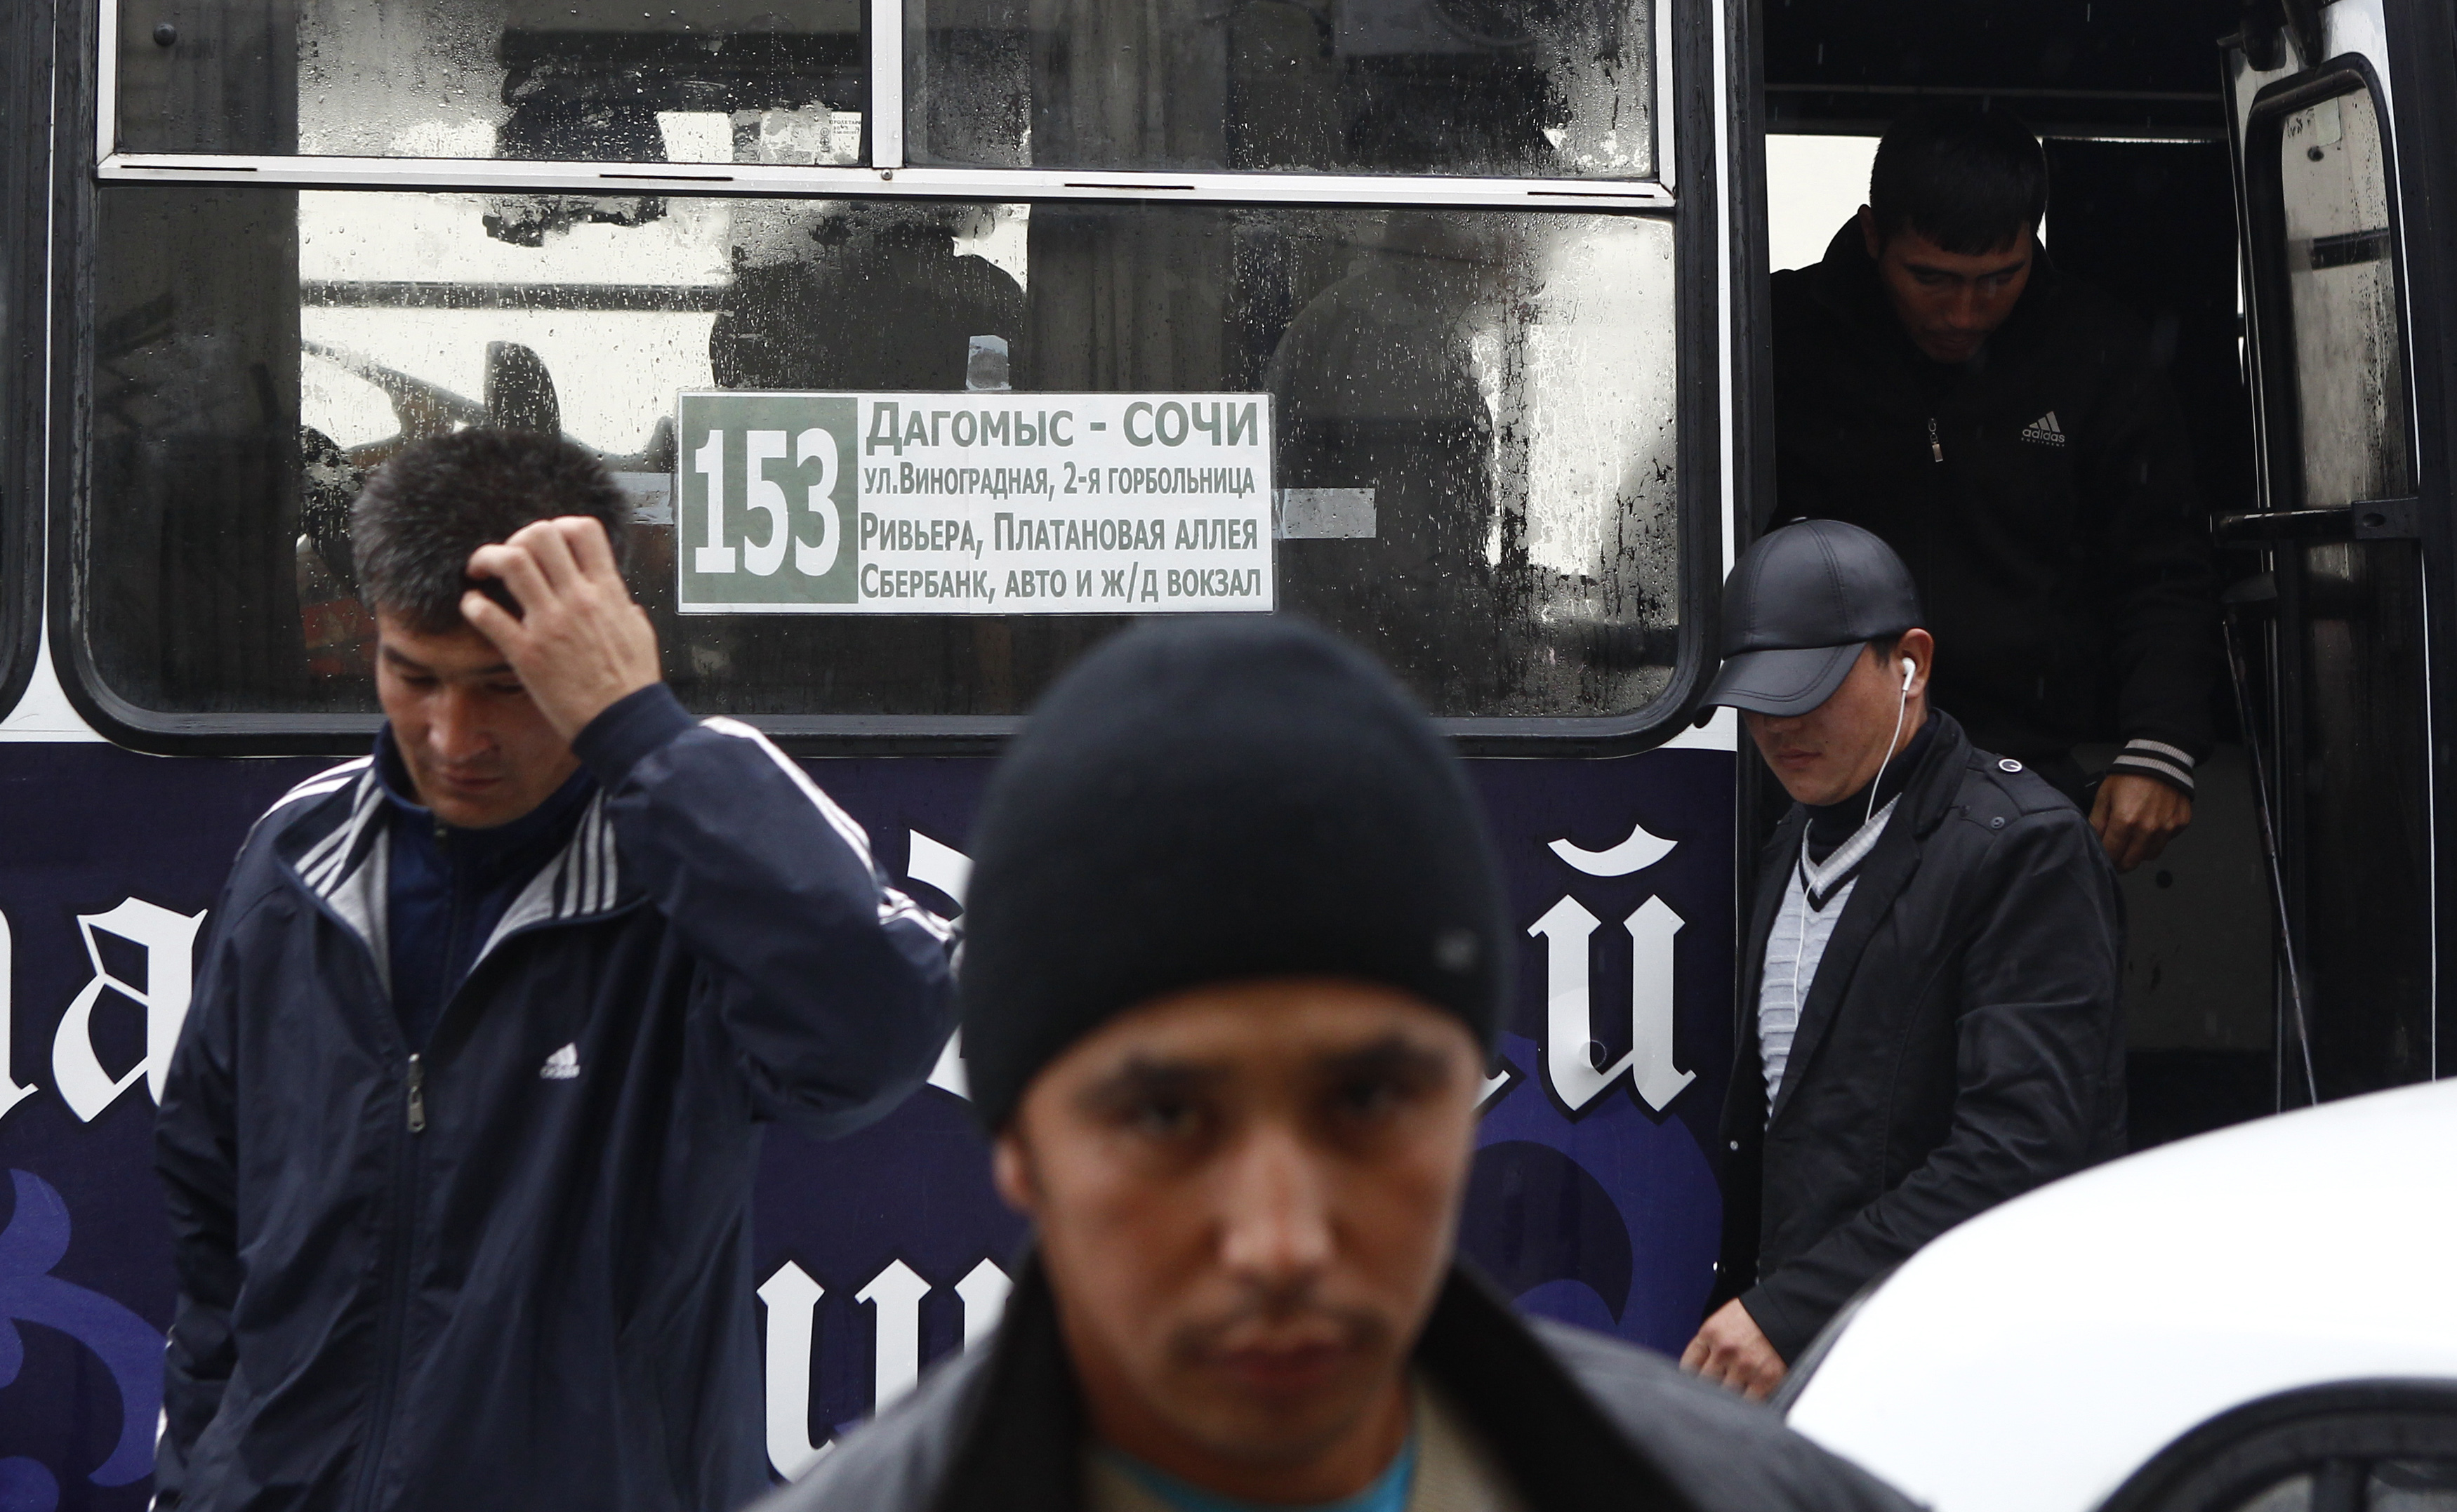 Migrant workers exit a bus after being detained in a sweep by authorities at a police station in central Sochi, 24 September 2013. 